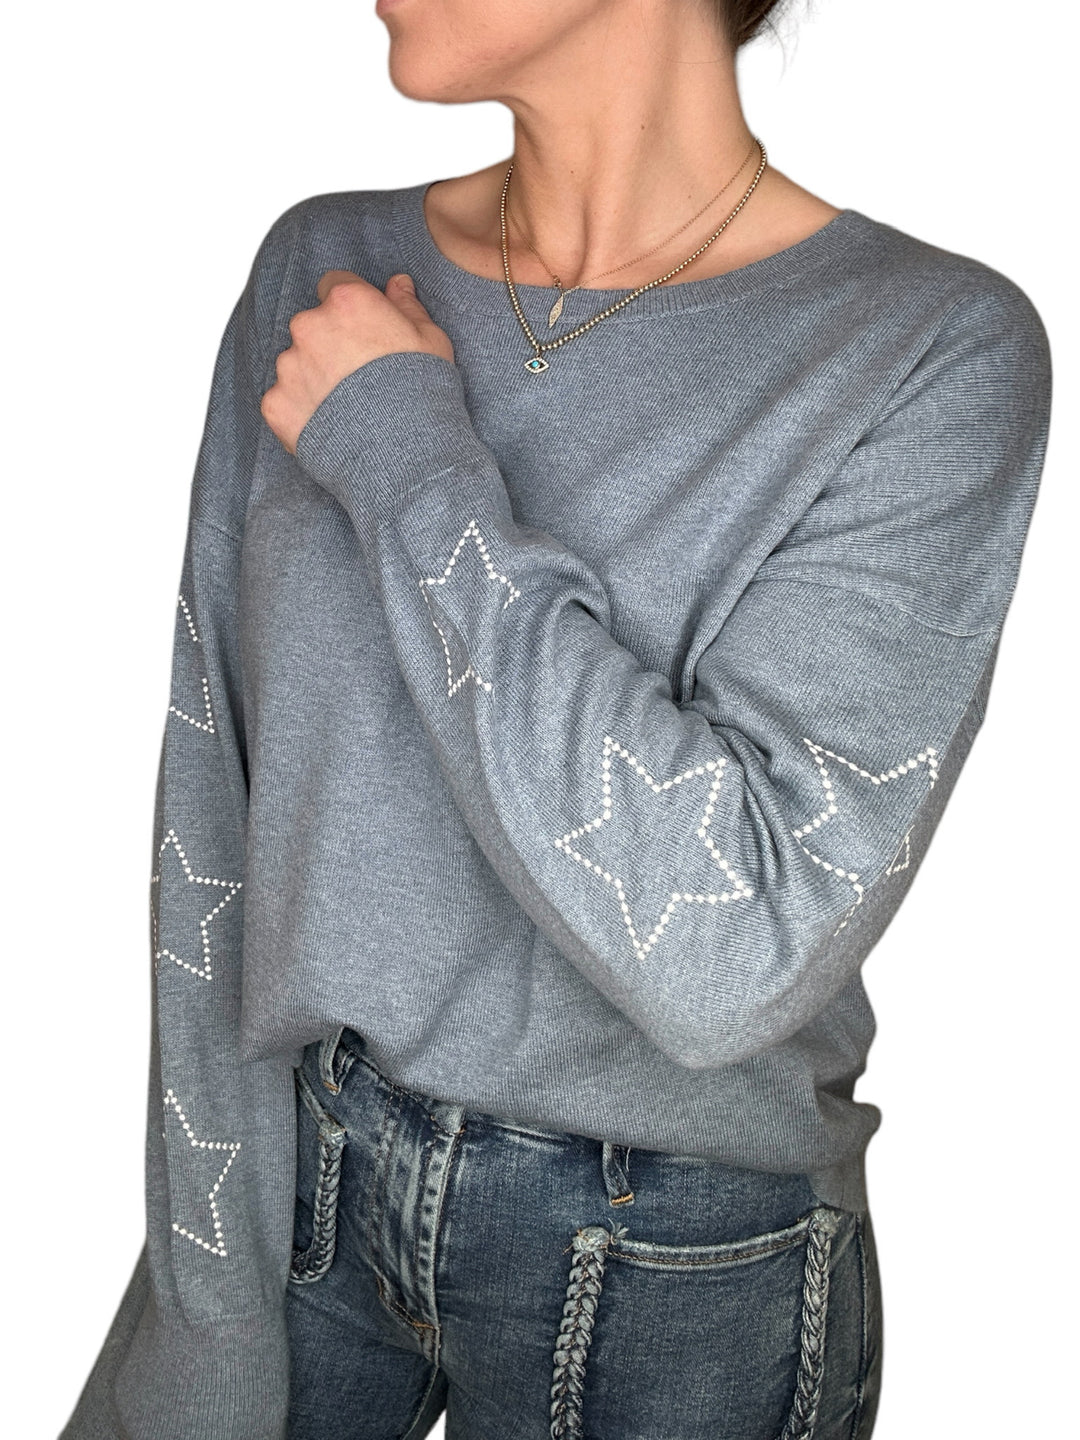 EMBROIDERED STAR SLEEVE SWEATER-CHAMBRAY